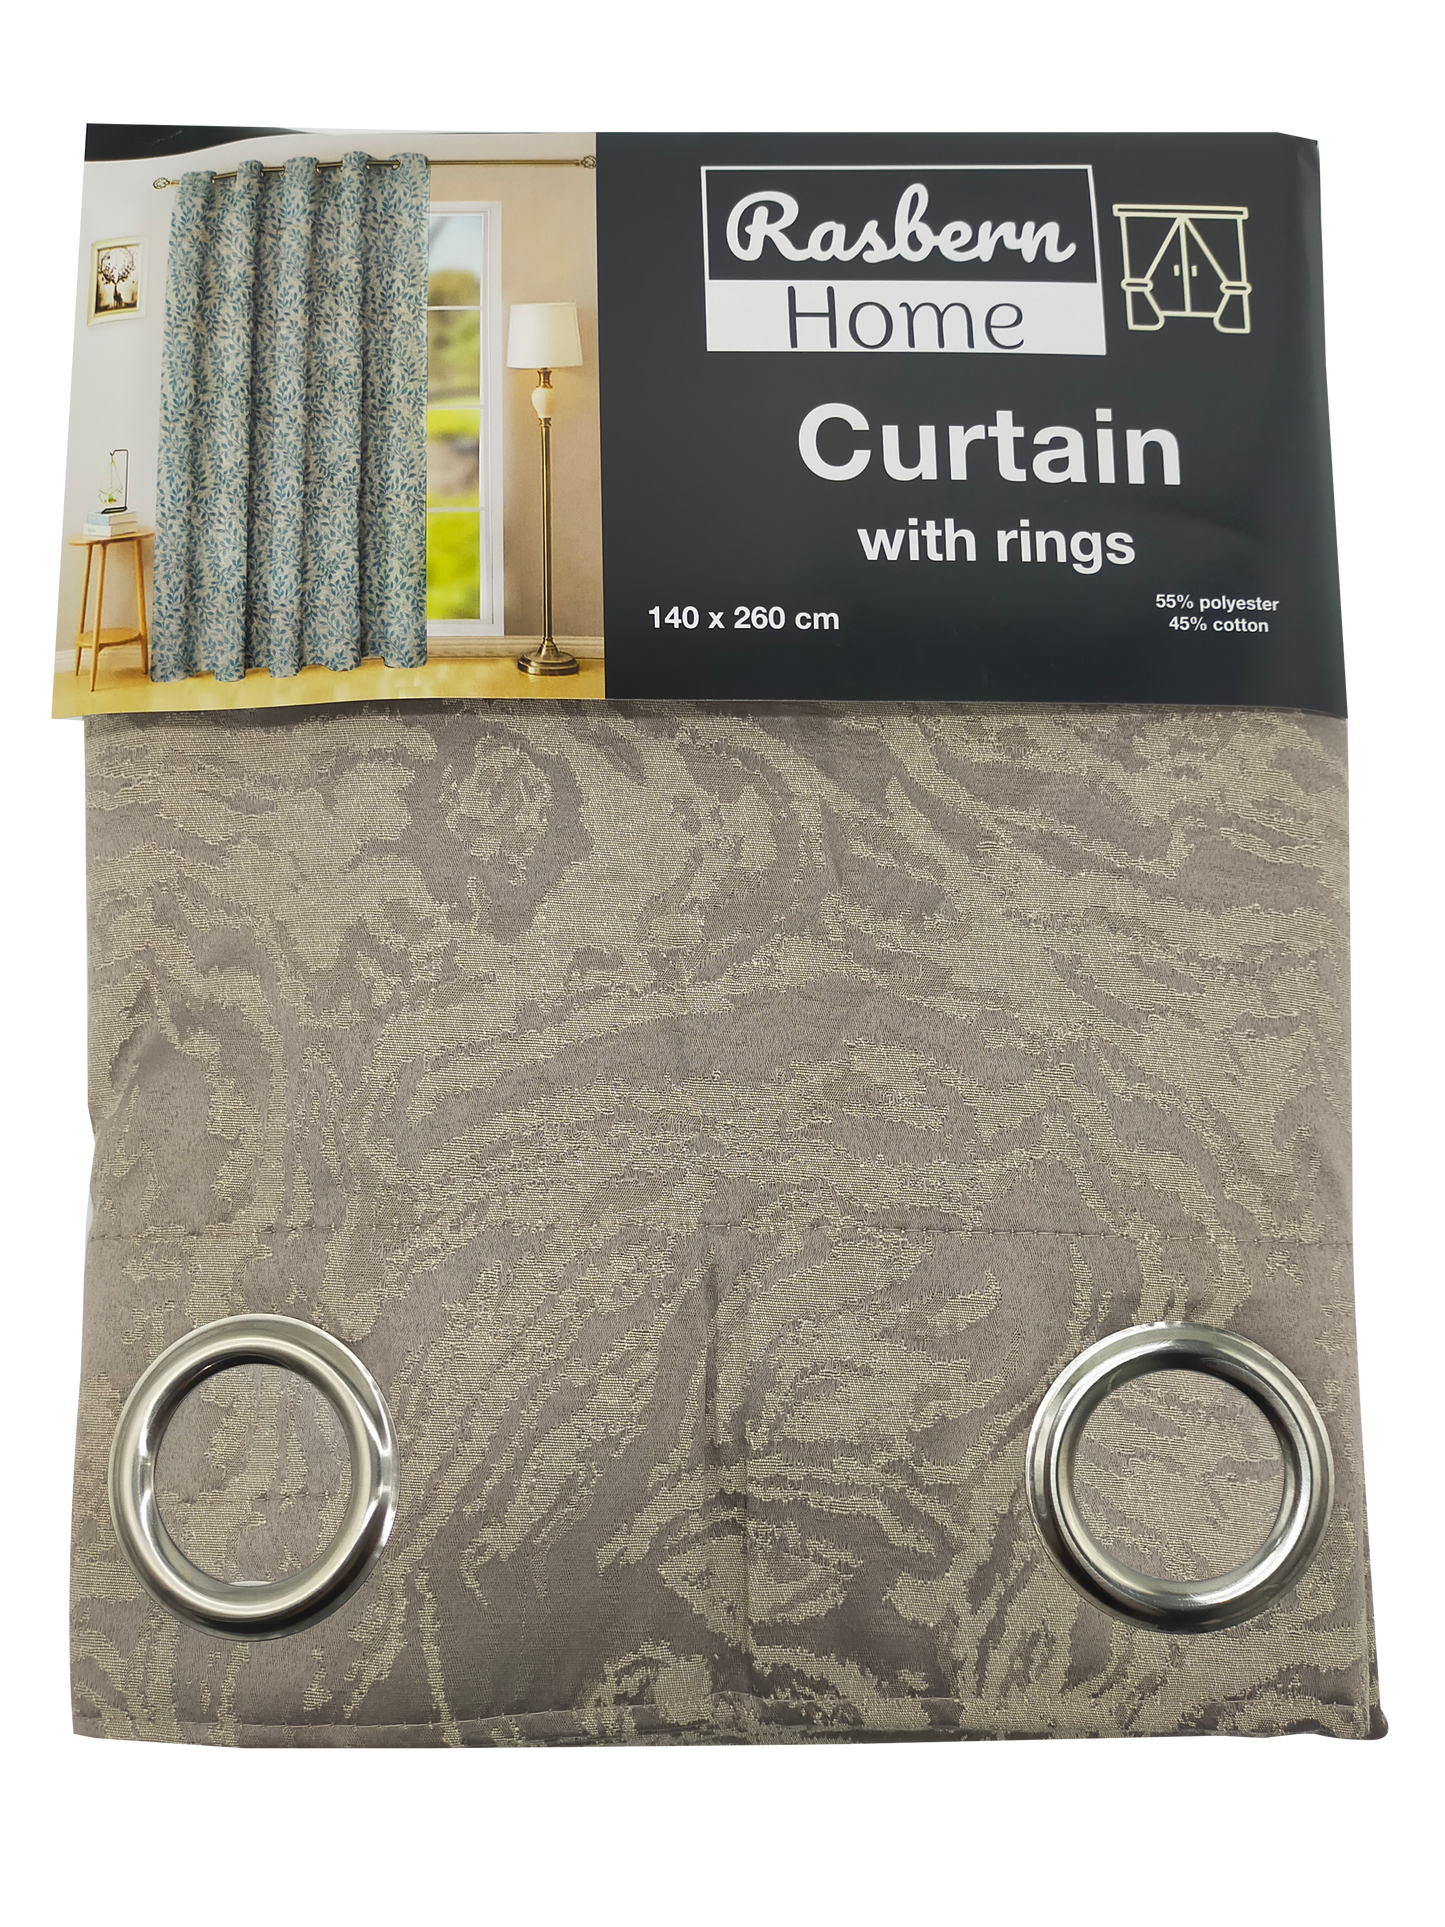 Whirl Pattern Curtain with rings